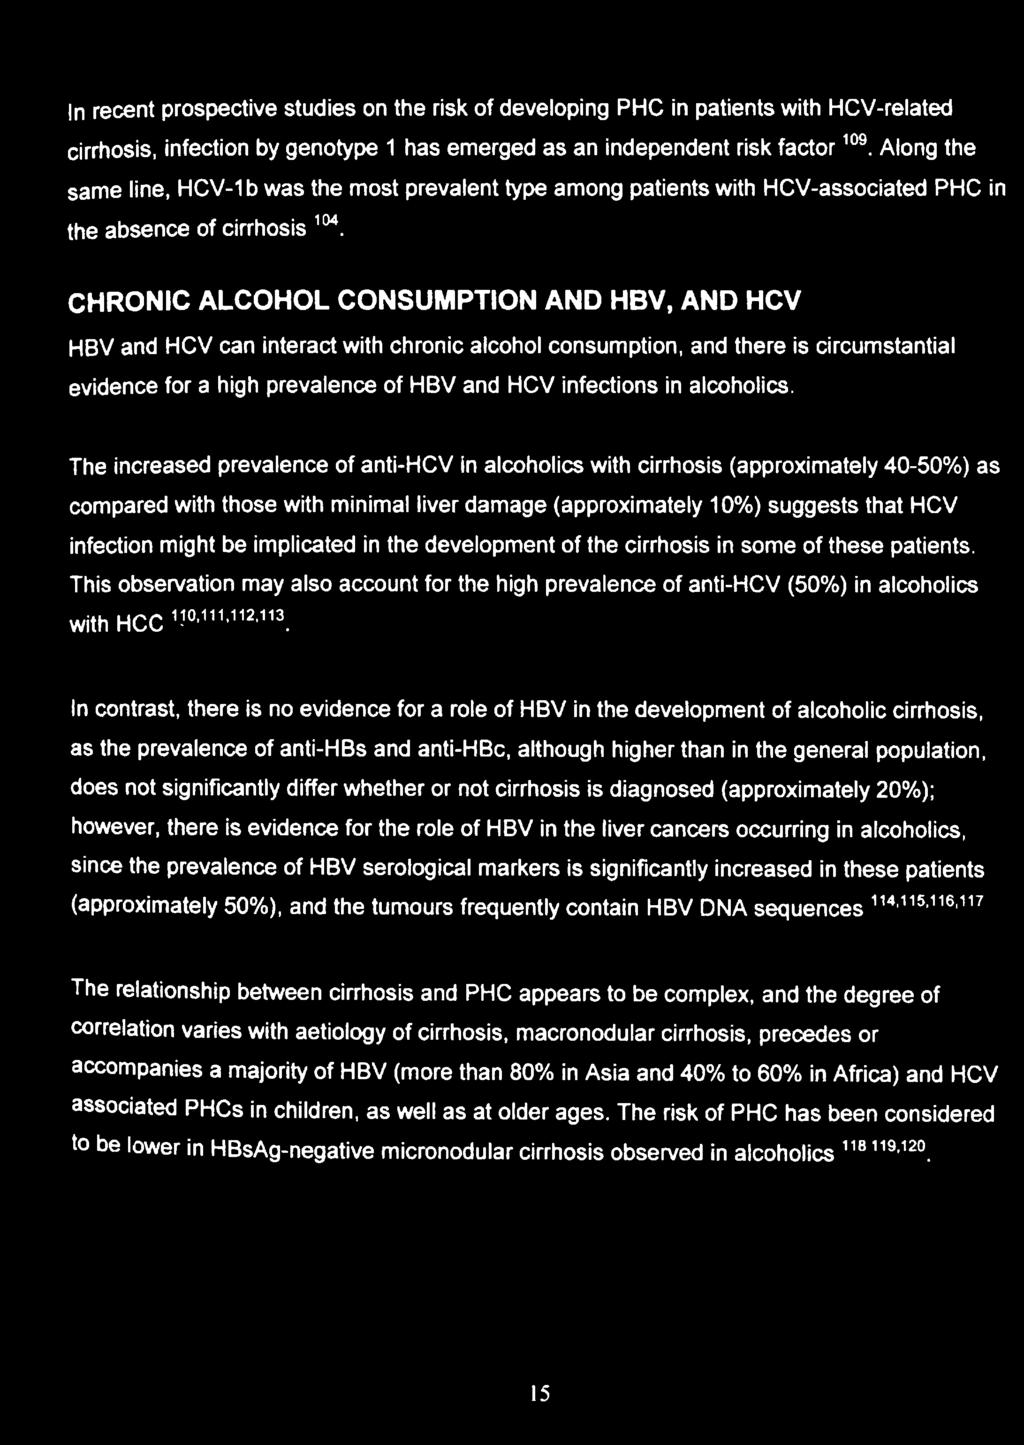 CHRONIC ALCOHOL CONSUMPTION AND HBV, AND HCV HBV and HCV can interact with chronic alcohol consumption, and there is circumstantial evidence for a high prevalence of HBV and HCV infections in